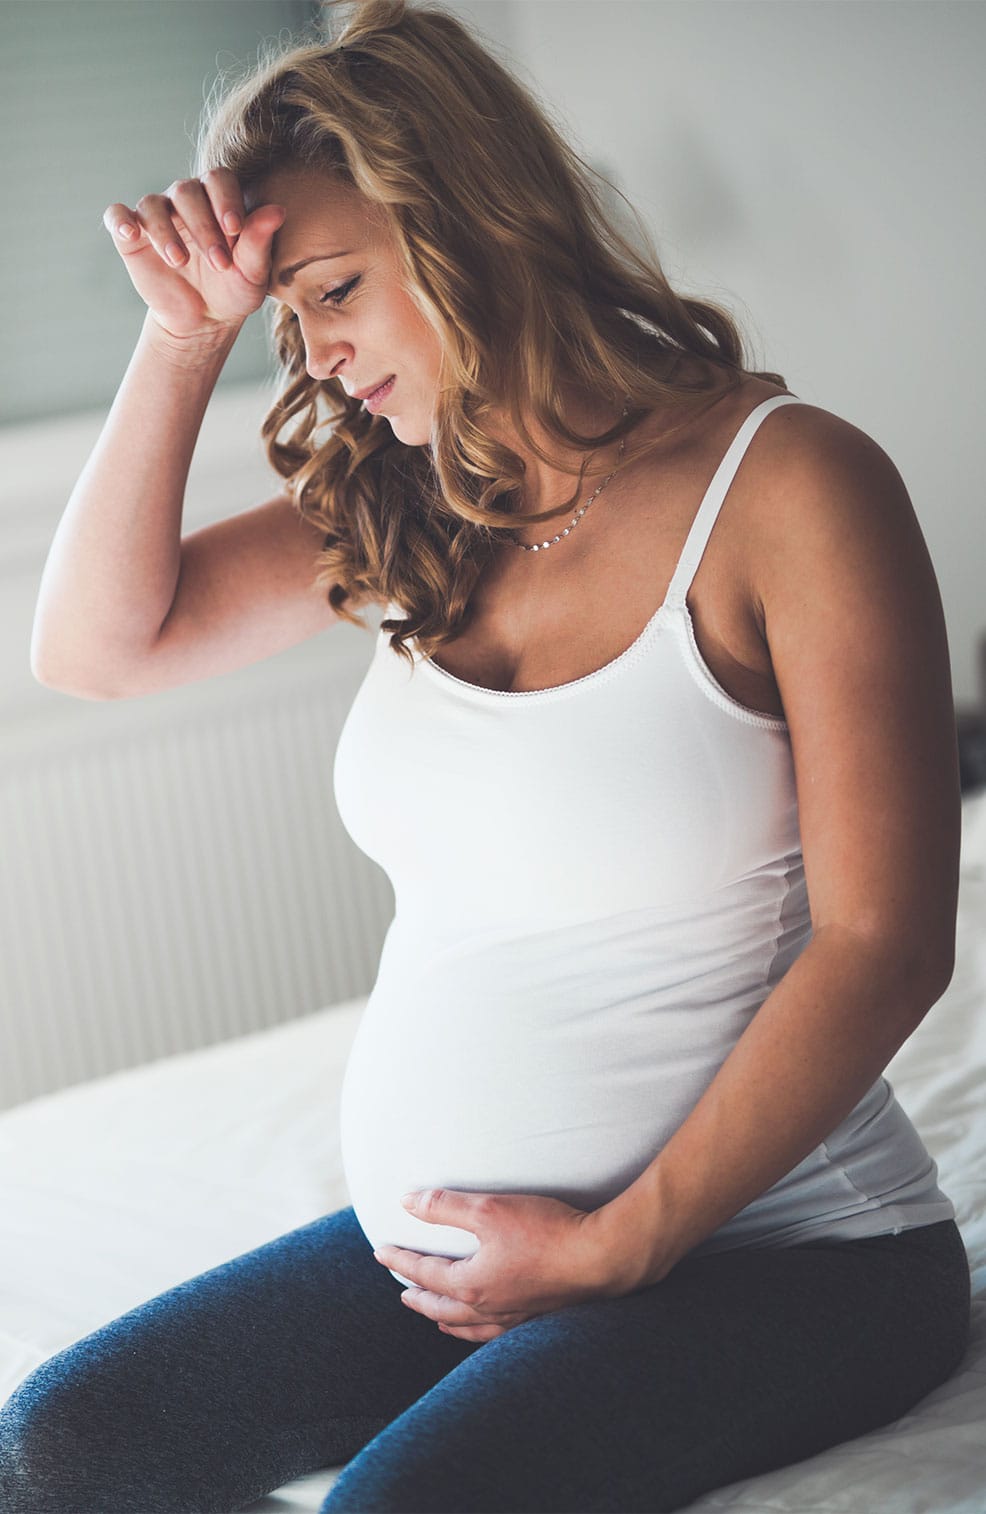 Hyperemesis Gravidarum is a life threatening condition in pregnancy that is so incredibly misunderstood and often misdiagnosed. Here's what you need to know about this horrible condition.